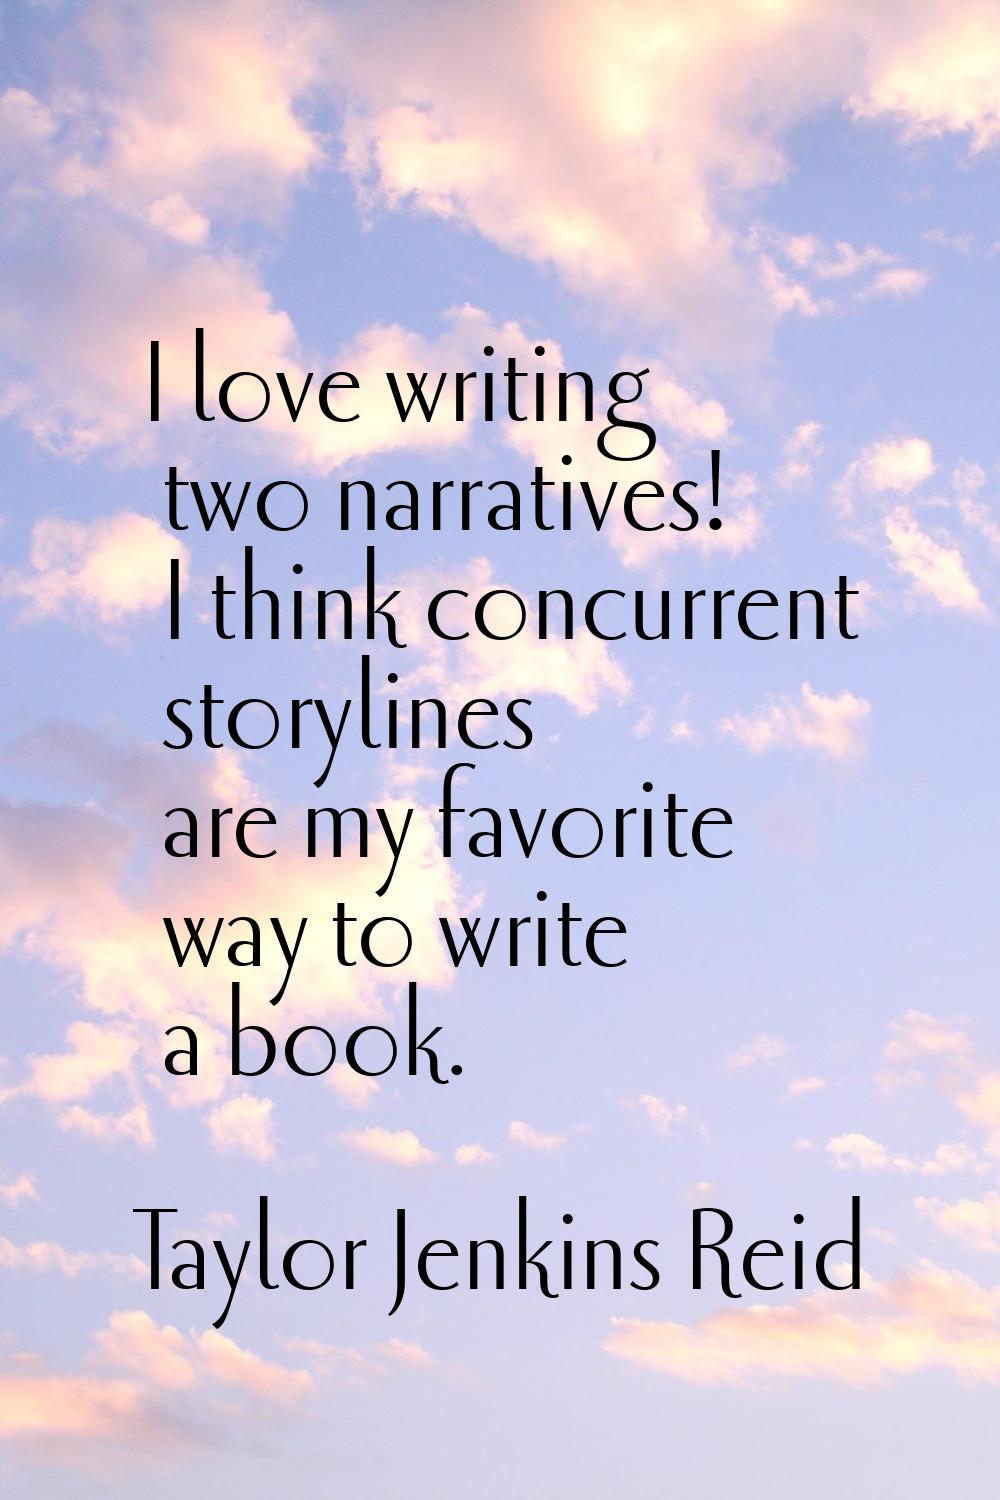 I love writing two narratives! I think concurrent storylines are my favorite way to write a book.